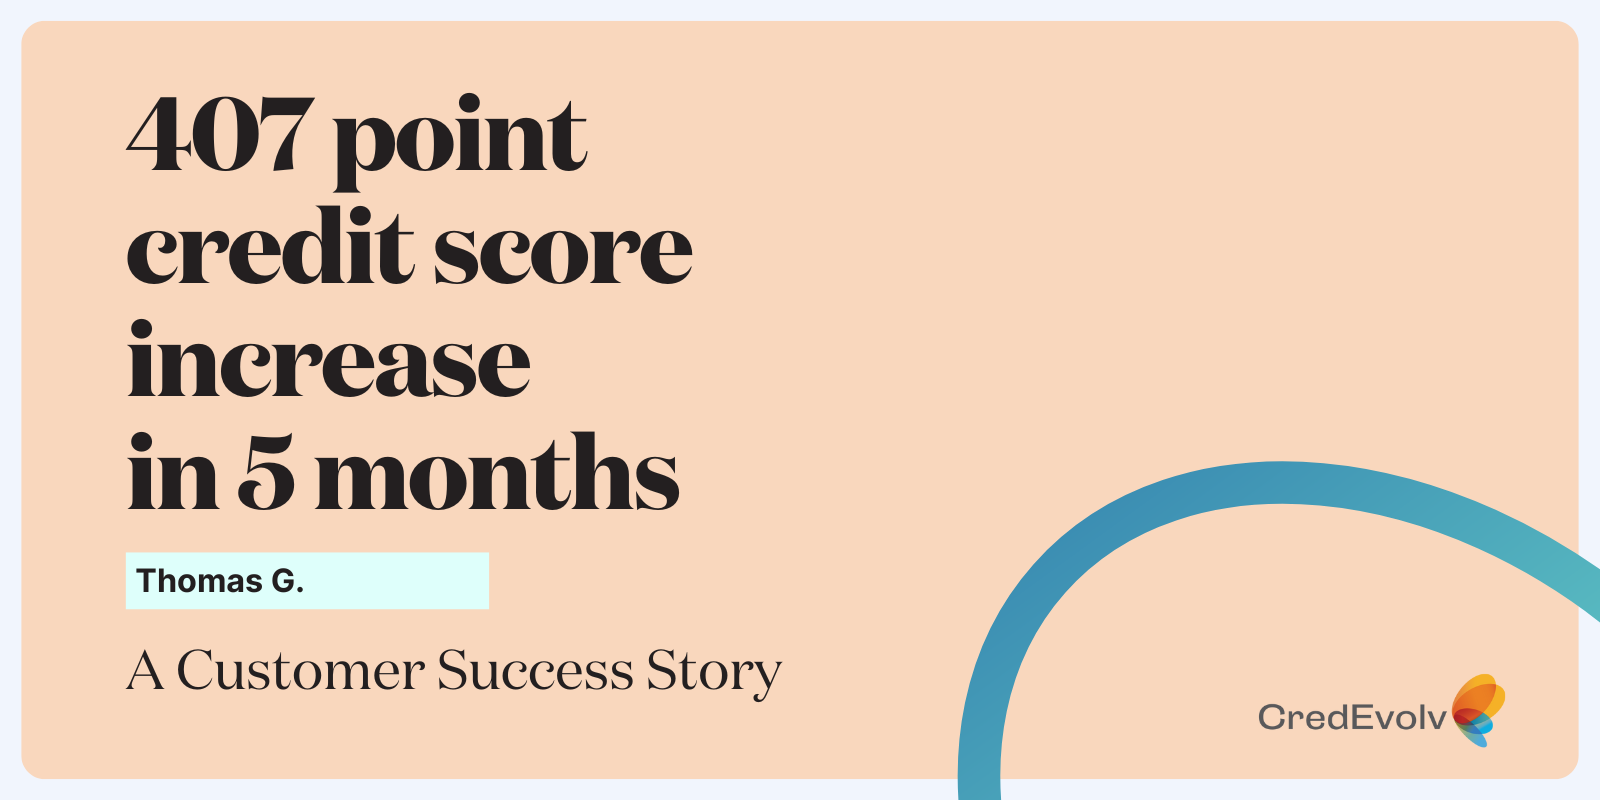 Credit Success Story - Featured Image - Thomas G - 407 point credit score increase in 5 months